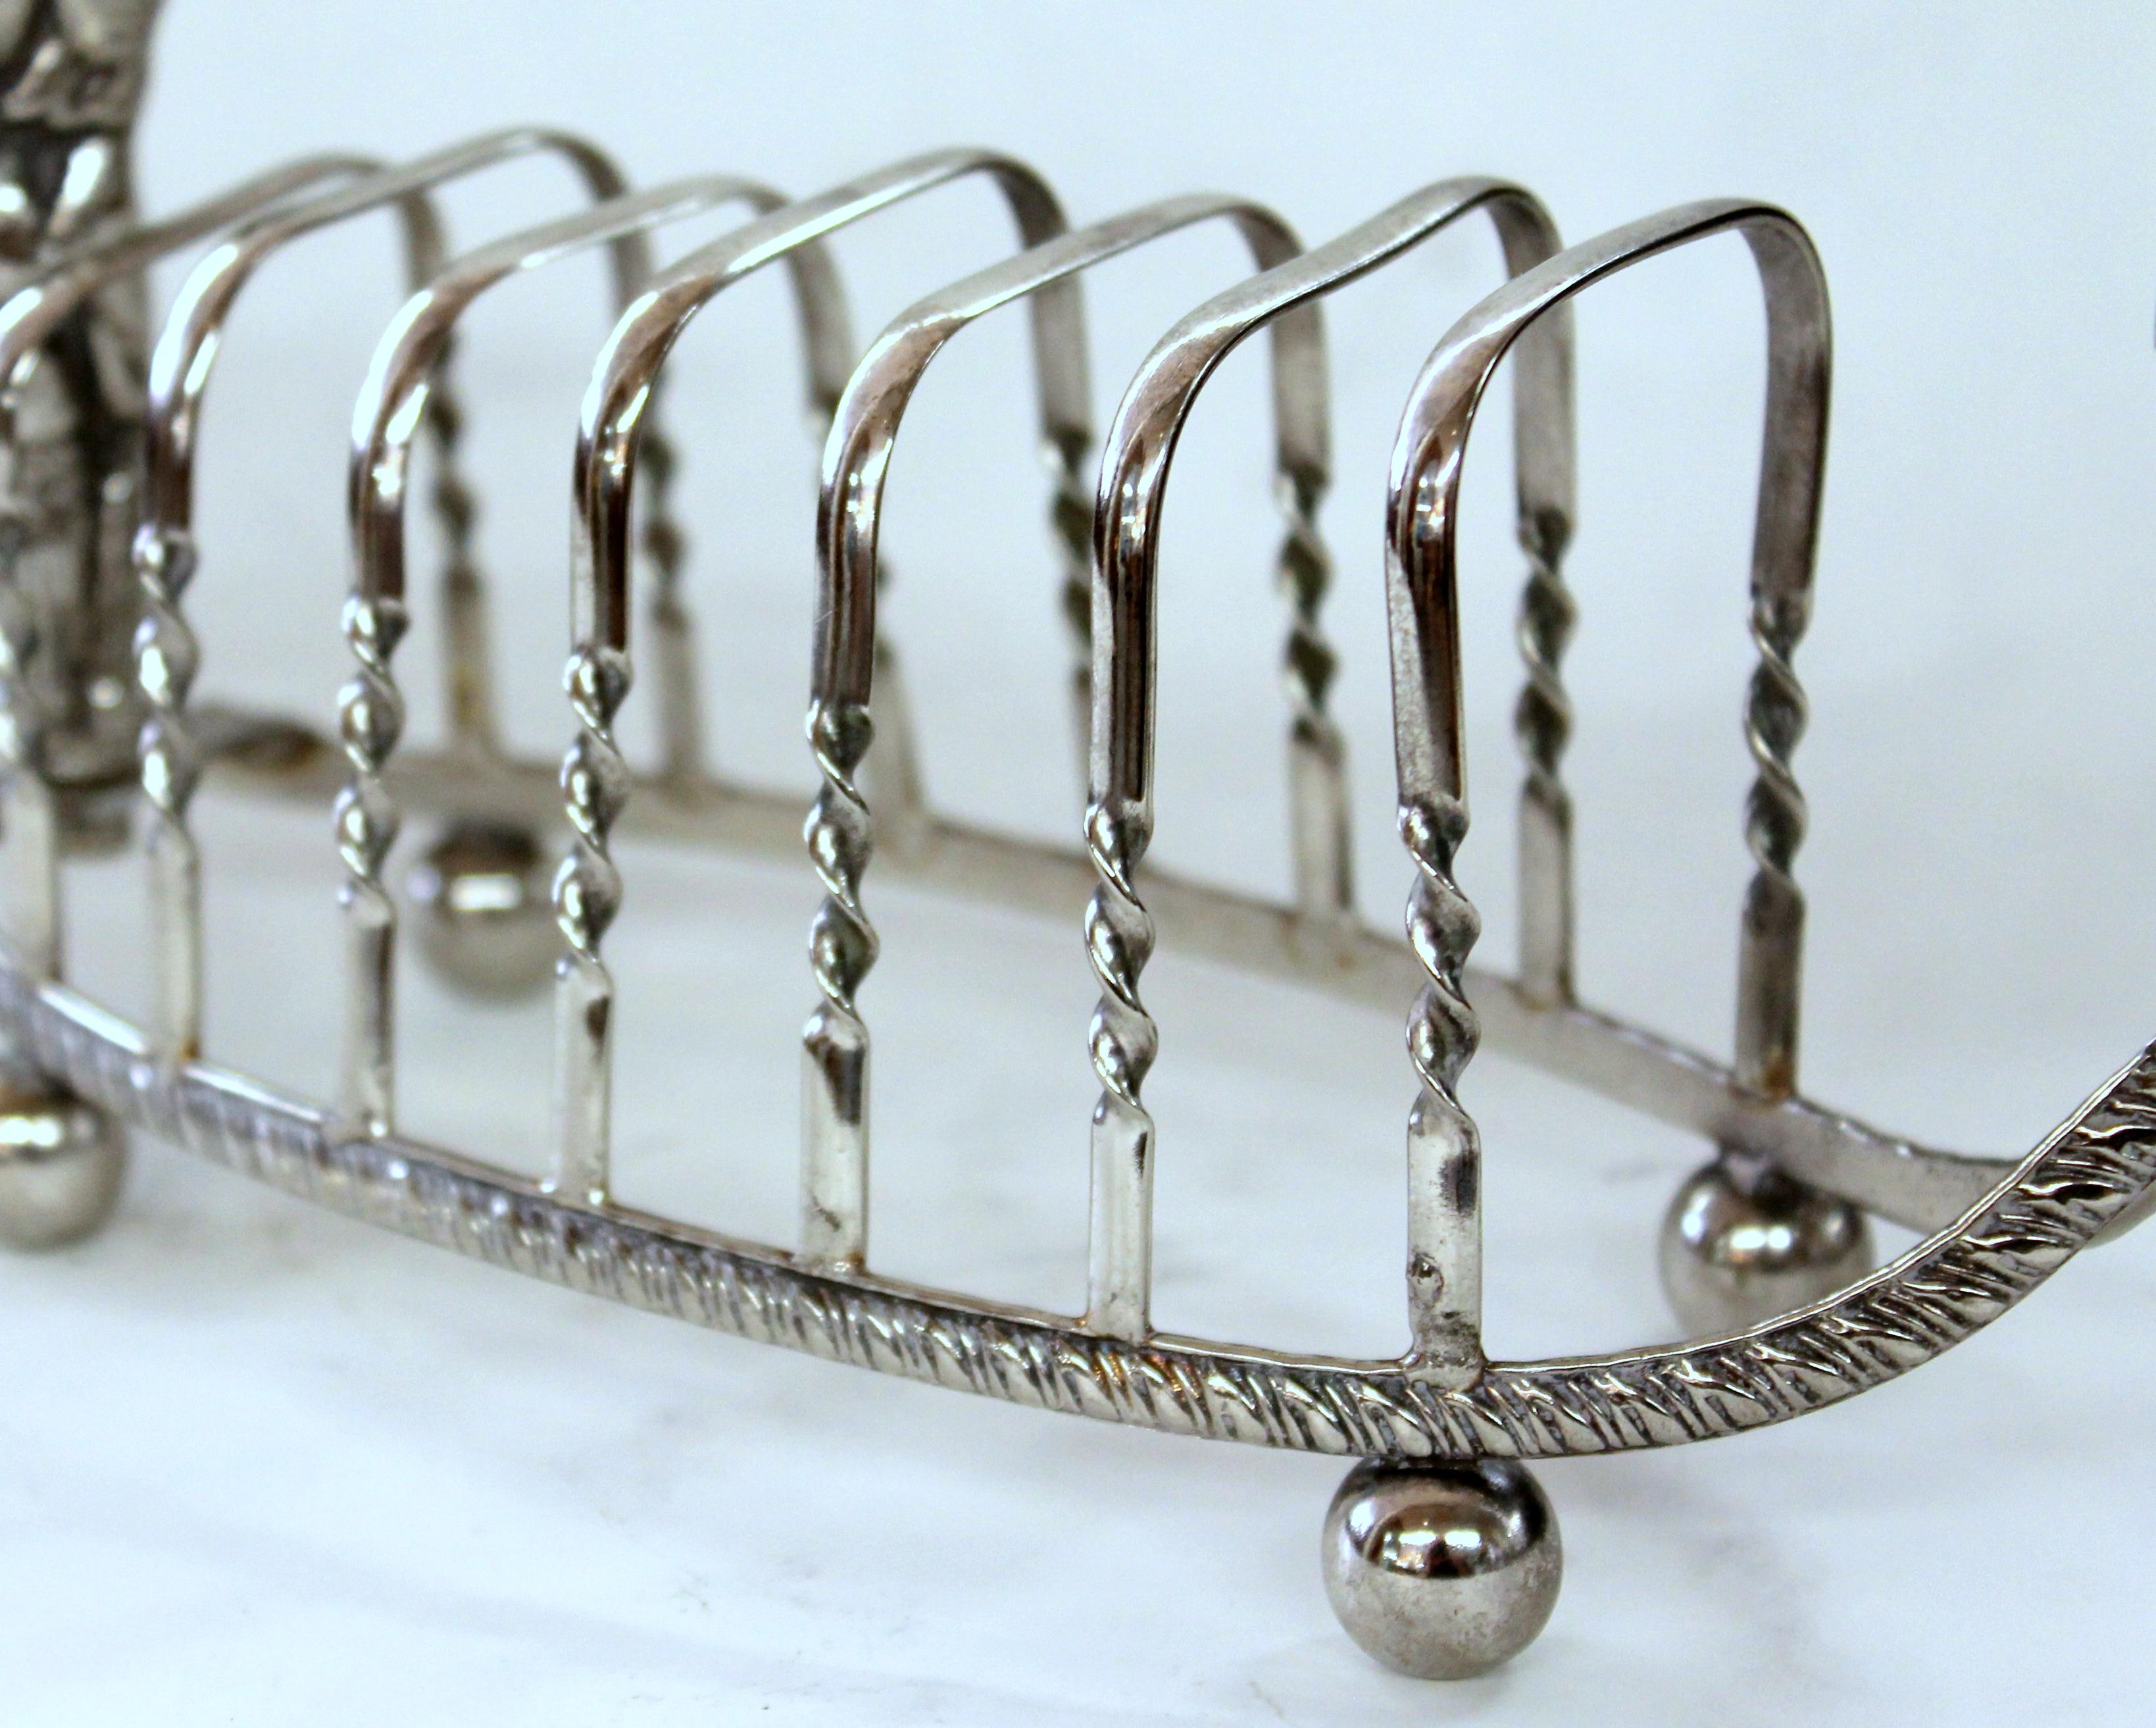 Very rare Old English silver plate gondola shape toast rack with gondolier. 

Please note, re-purpose for letters, napkin holder, guest towels, etc.